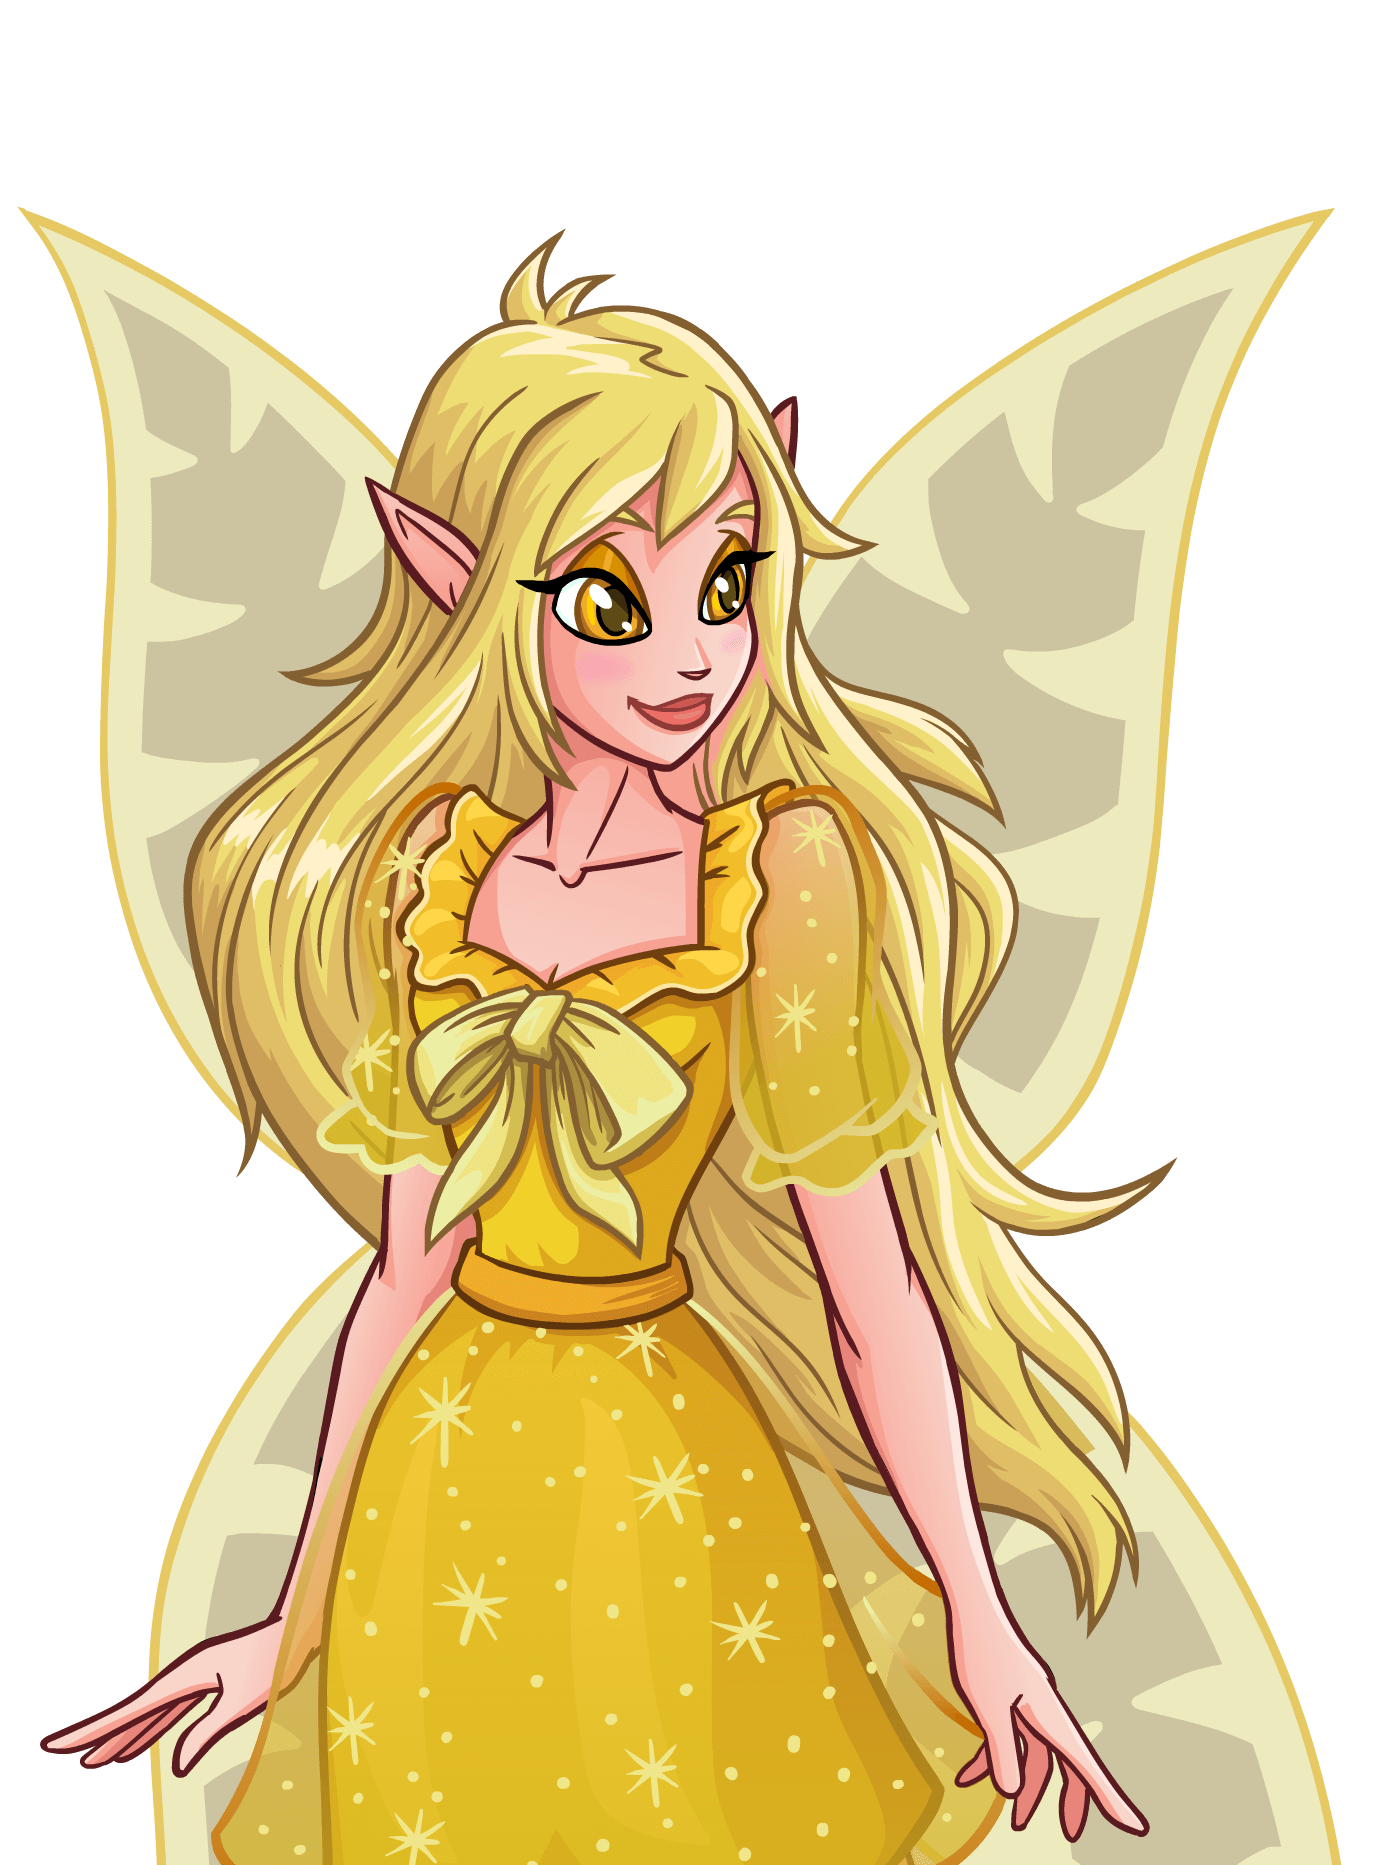 https://images.neopets.com/faerieland/lostfragments/images/lf-luxinia.png